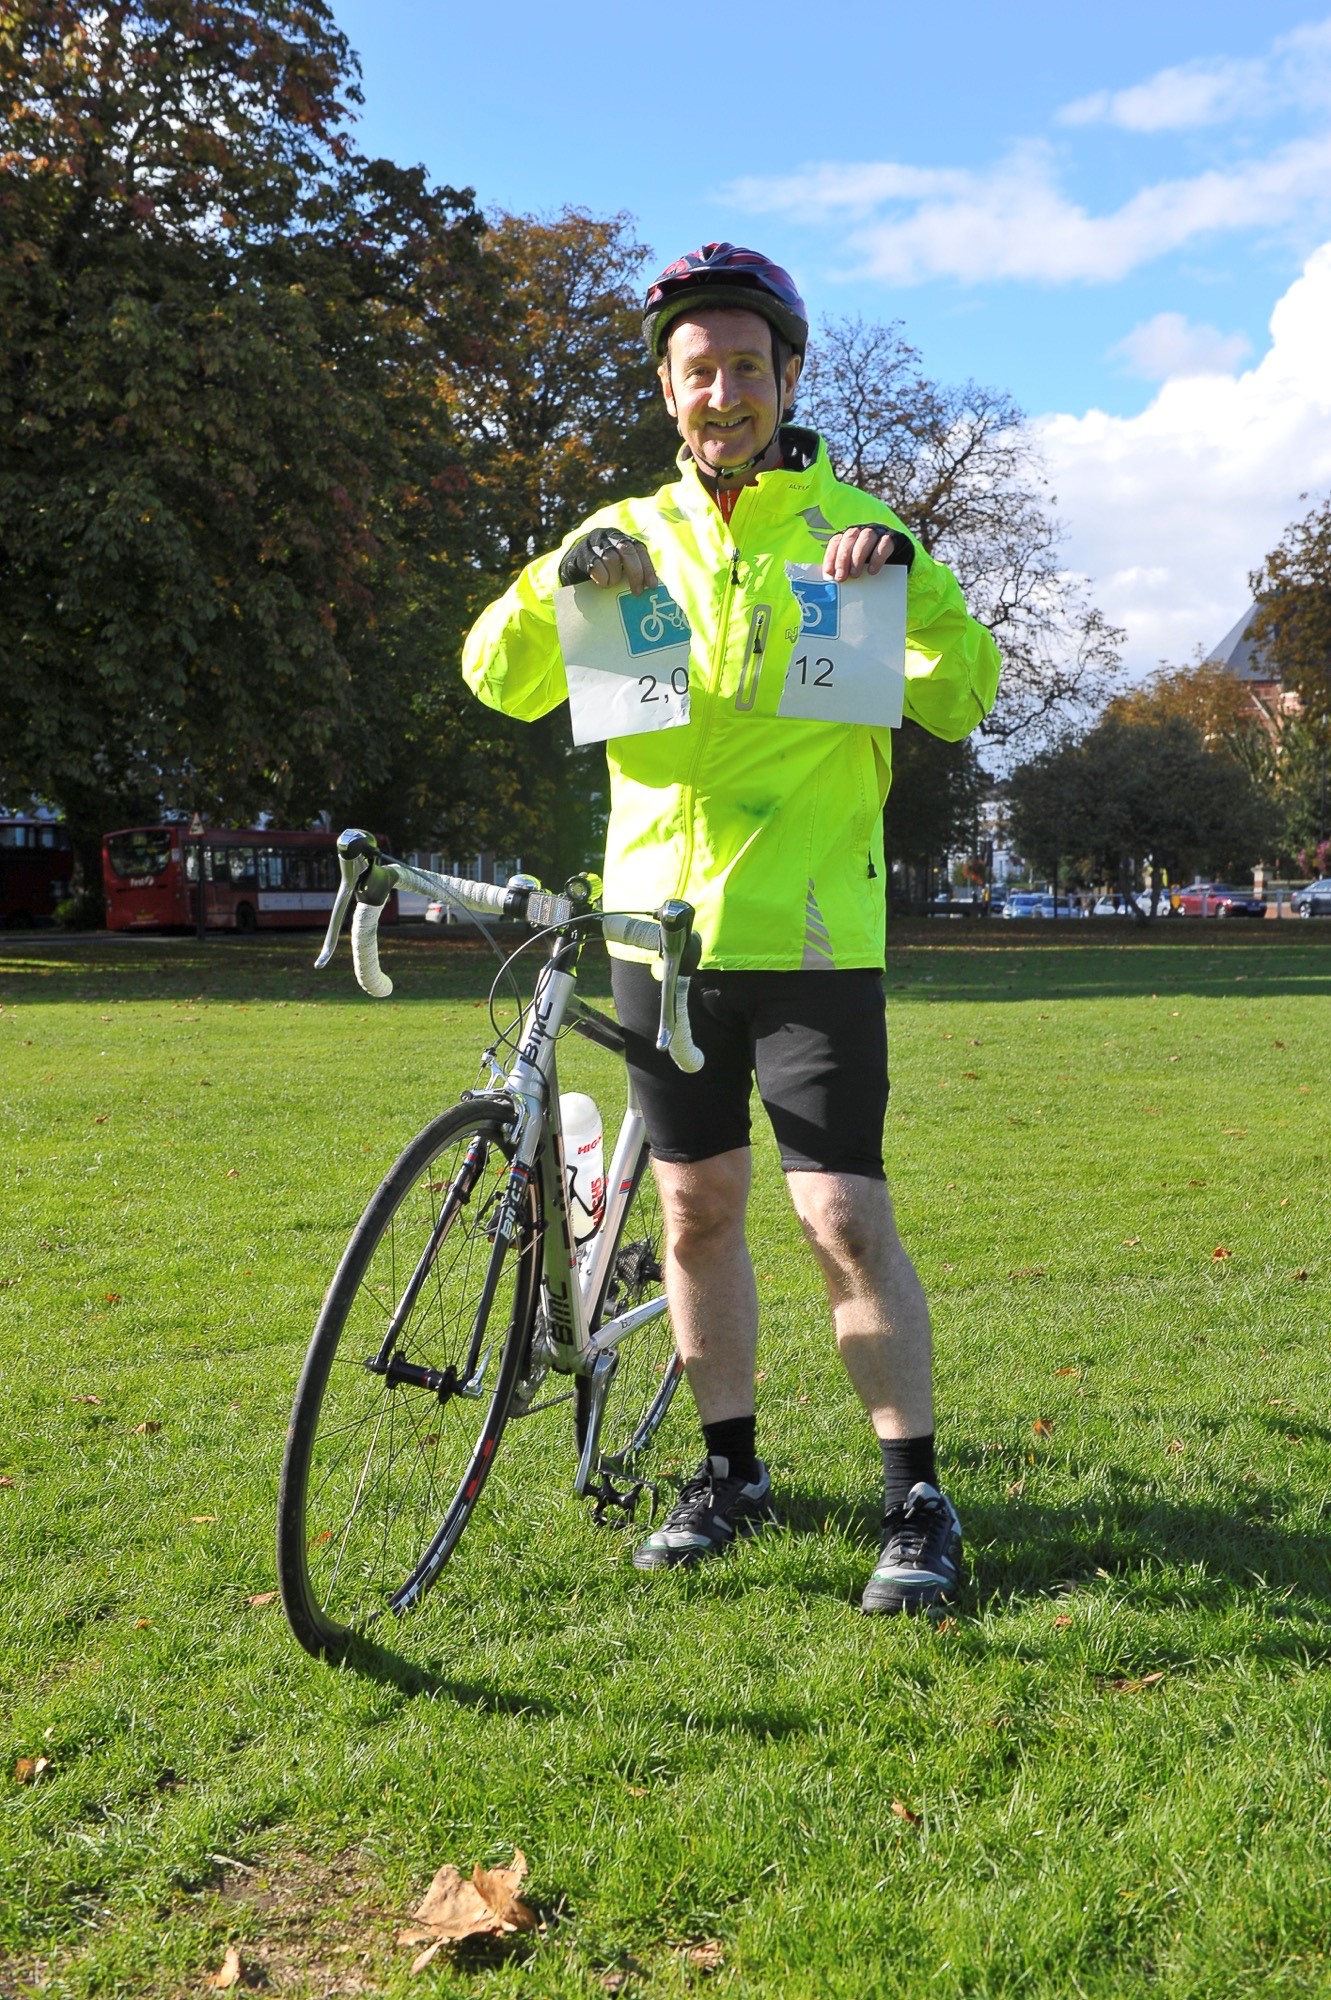 Image of Councillor Julian Bell having completed his 2012 miles in 2012 challenge